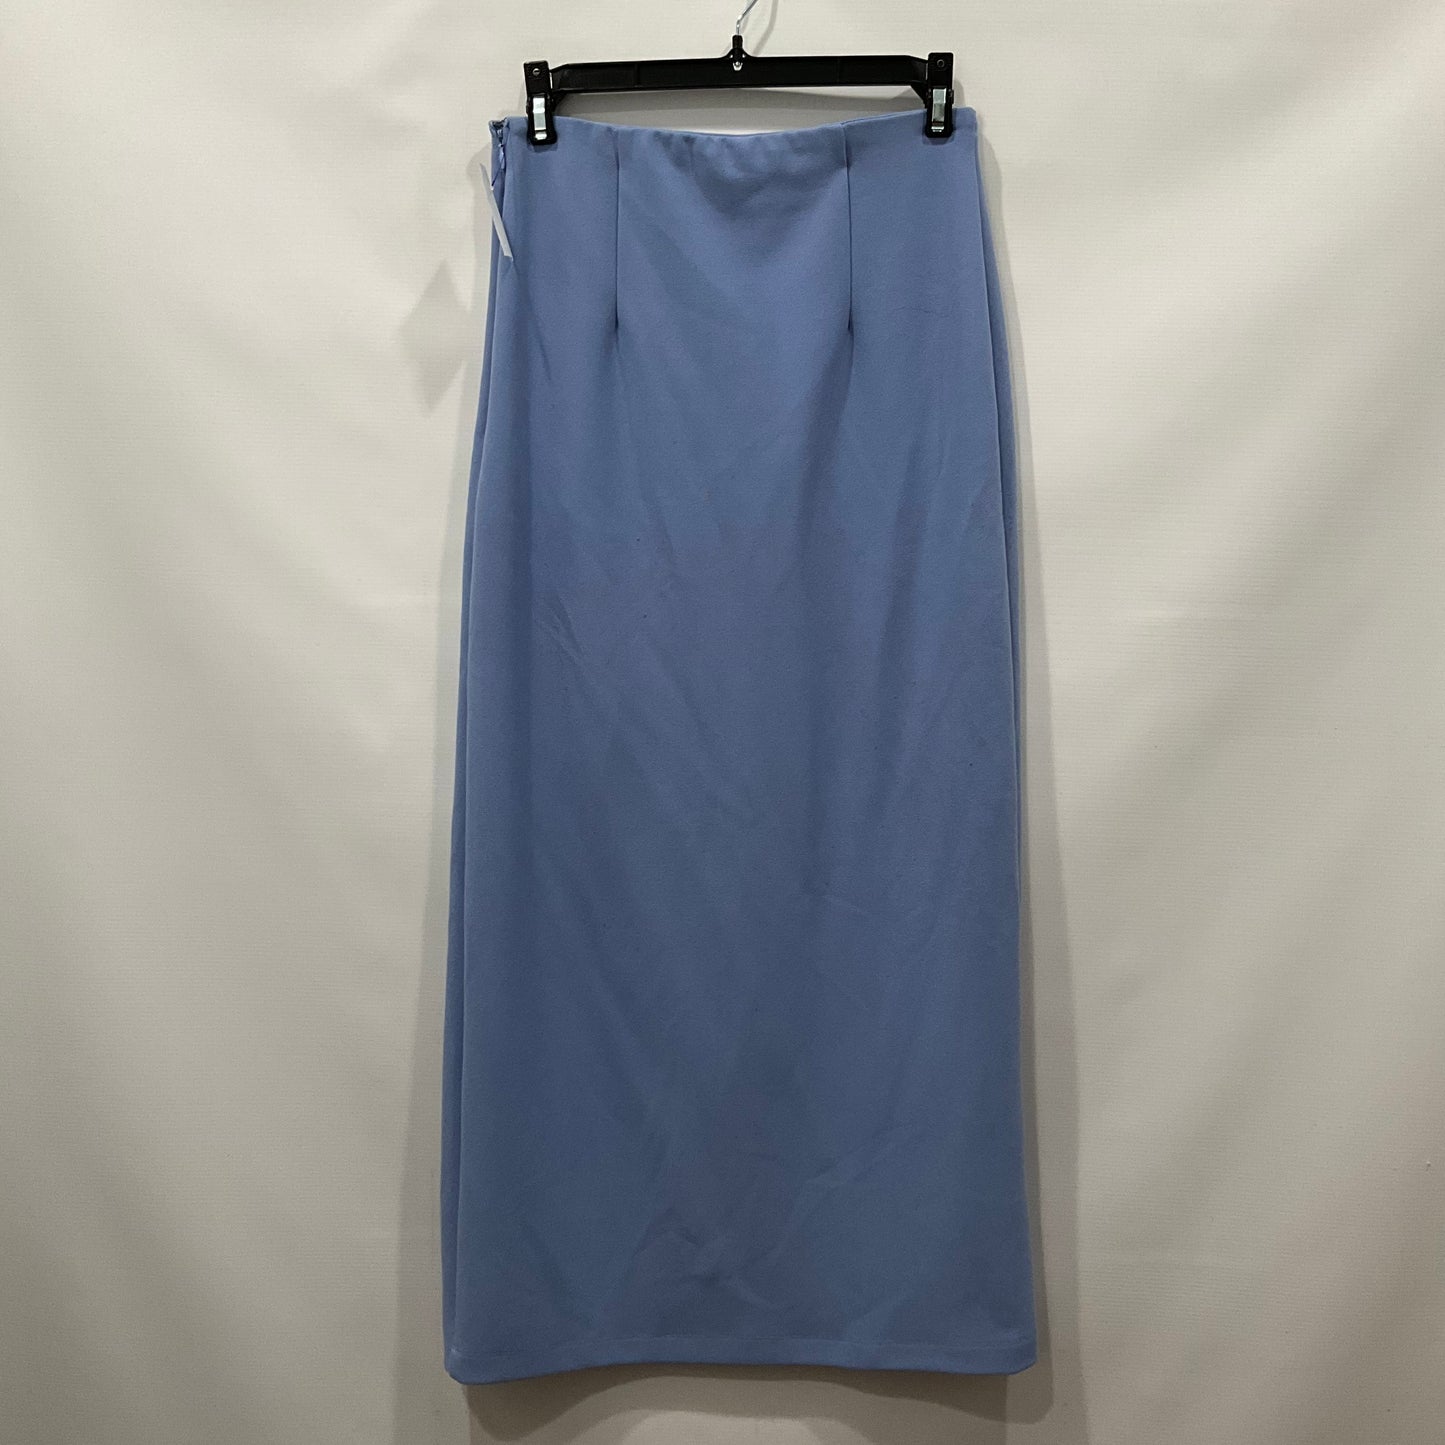 Skirt Midi By Abercrombie And Fitch  Size: S